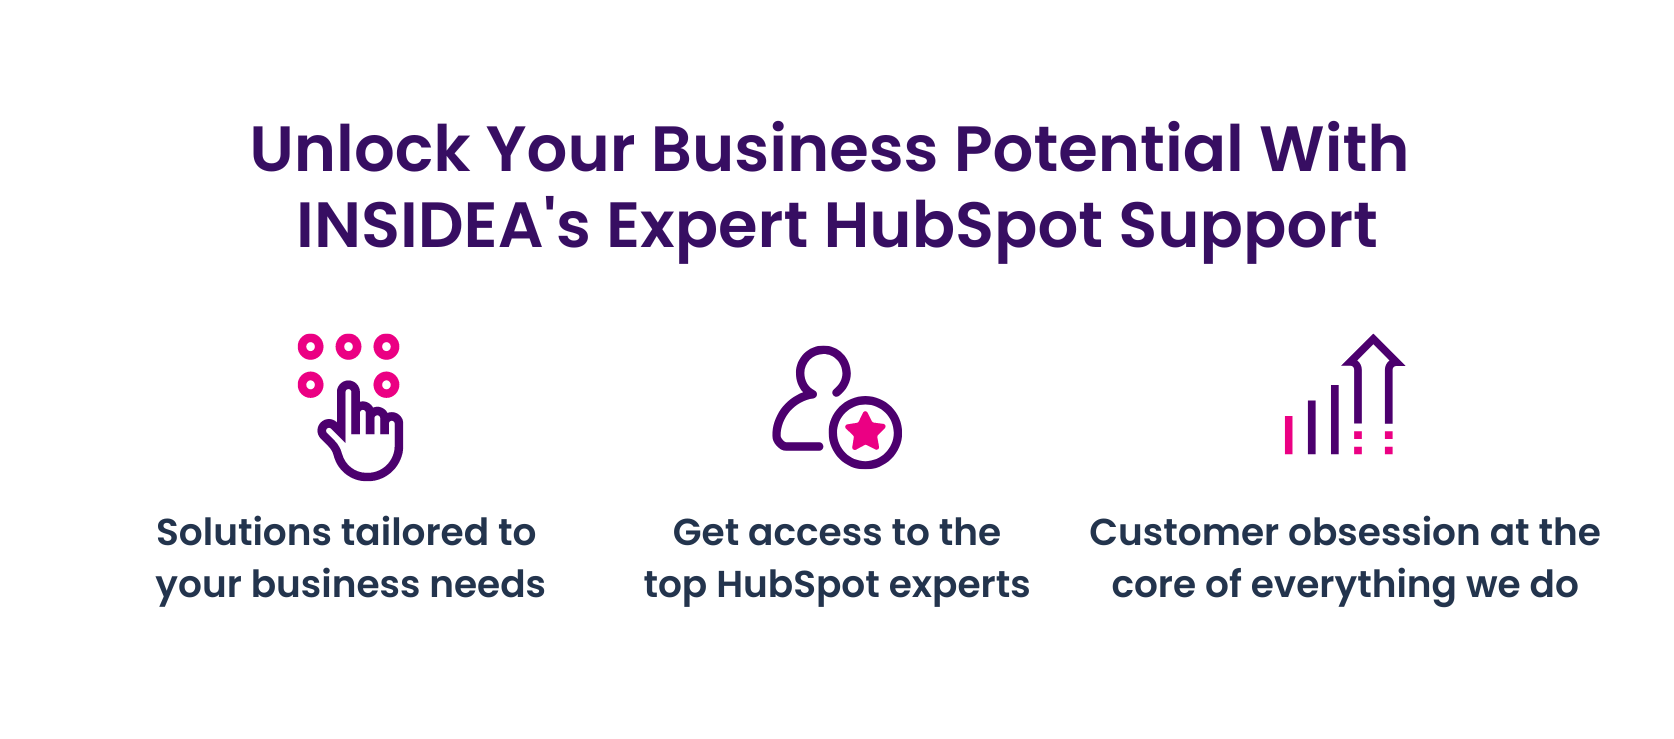 Unlock Your Potential with INSIDEA's HubSpot service